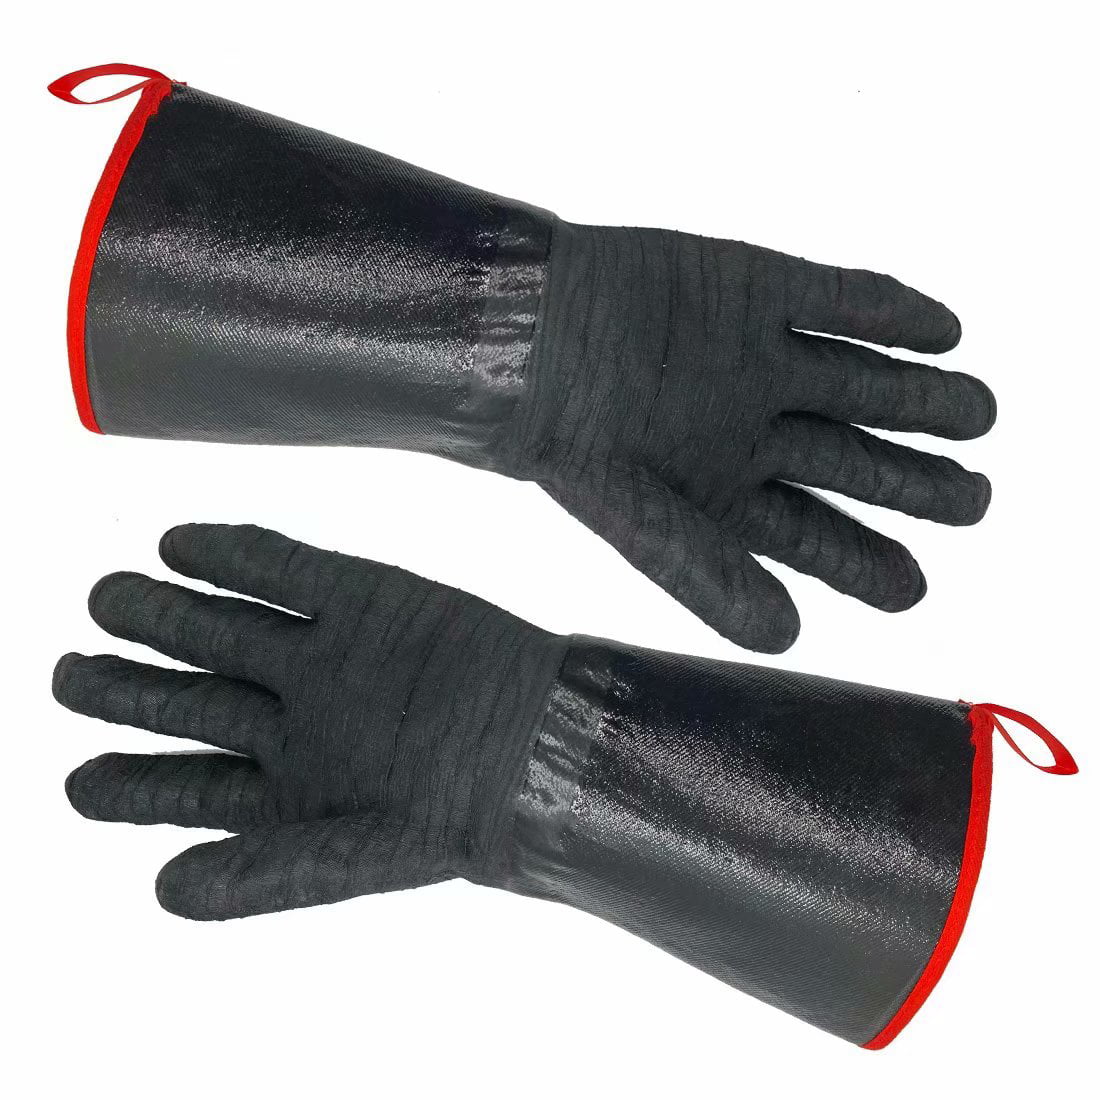 Fireplace Grilling BBQ Cloves BBQ Gloves Oven Mitt,Hand Protection from Grilling,Kitchen Double Layers Silicone CoatingHeat and Flame Resistant Up to 932°F Heat Resistant Cooking